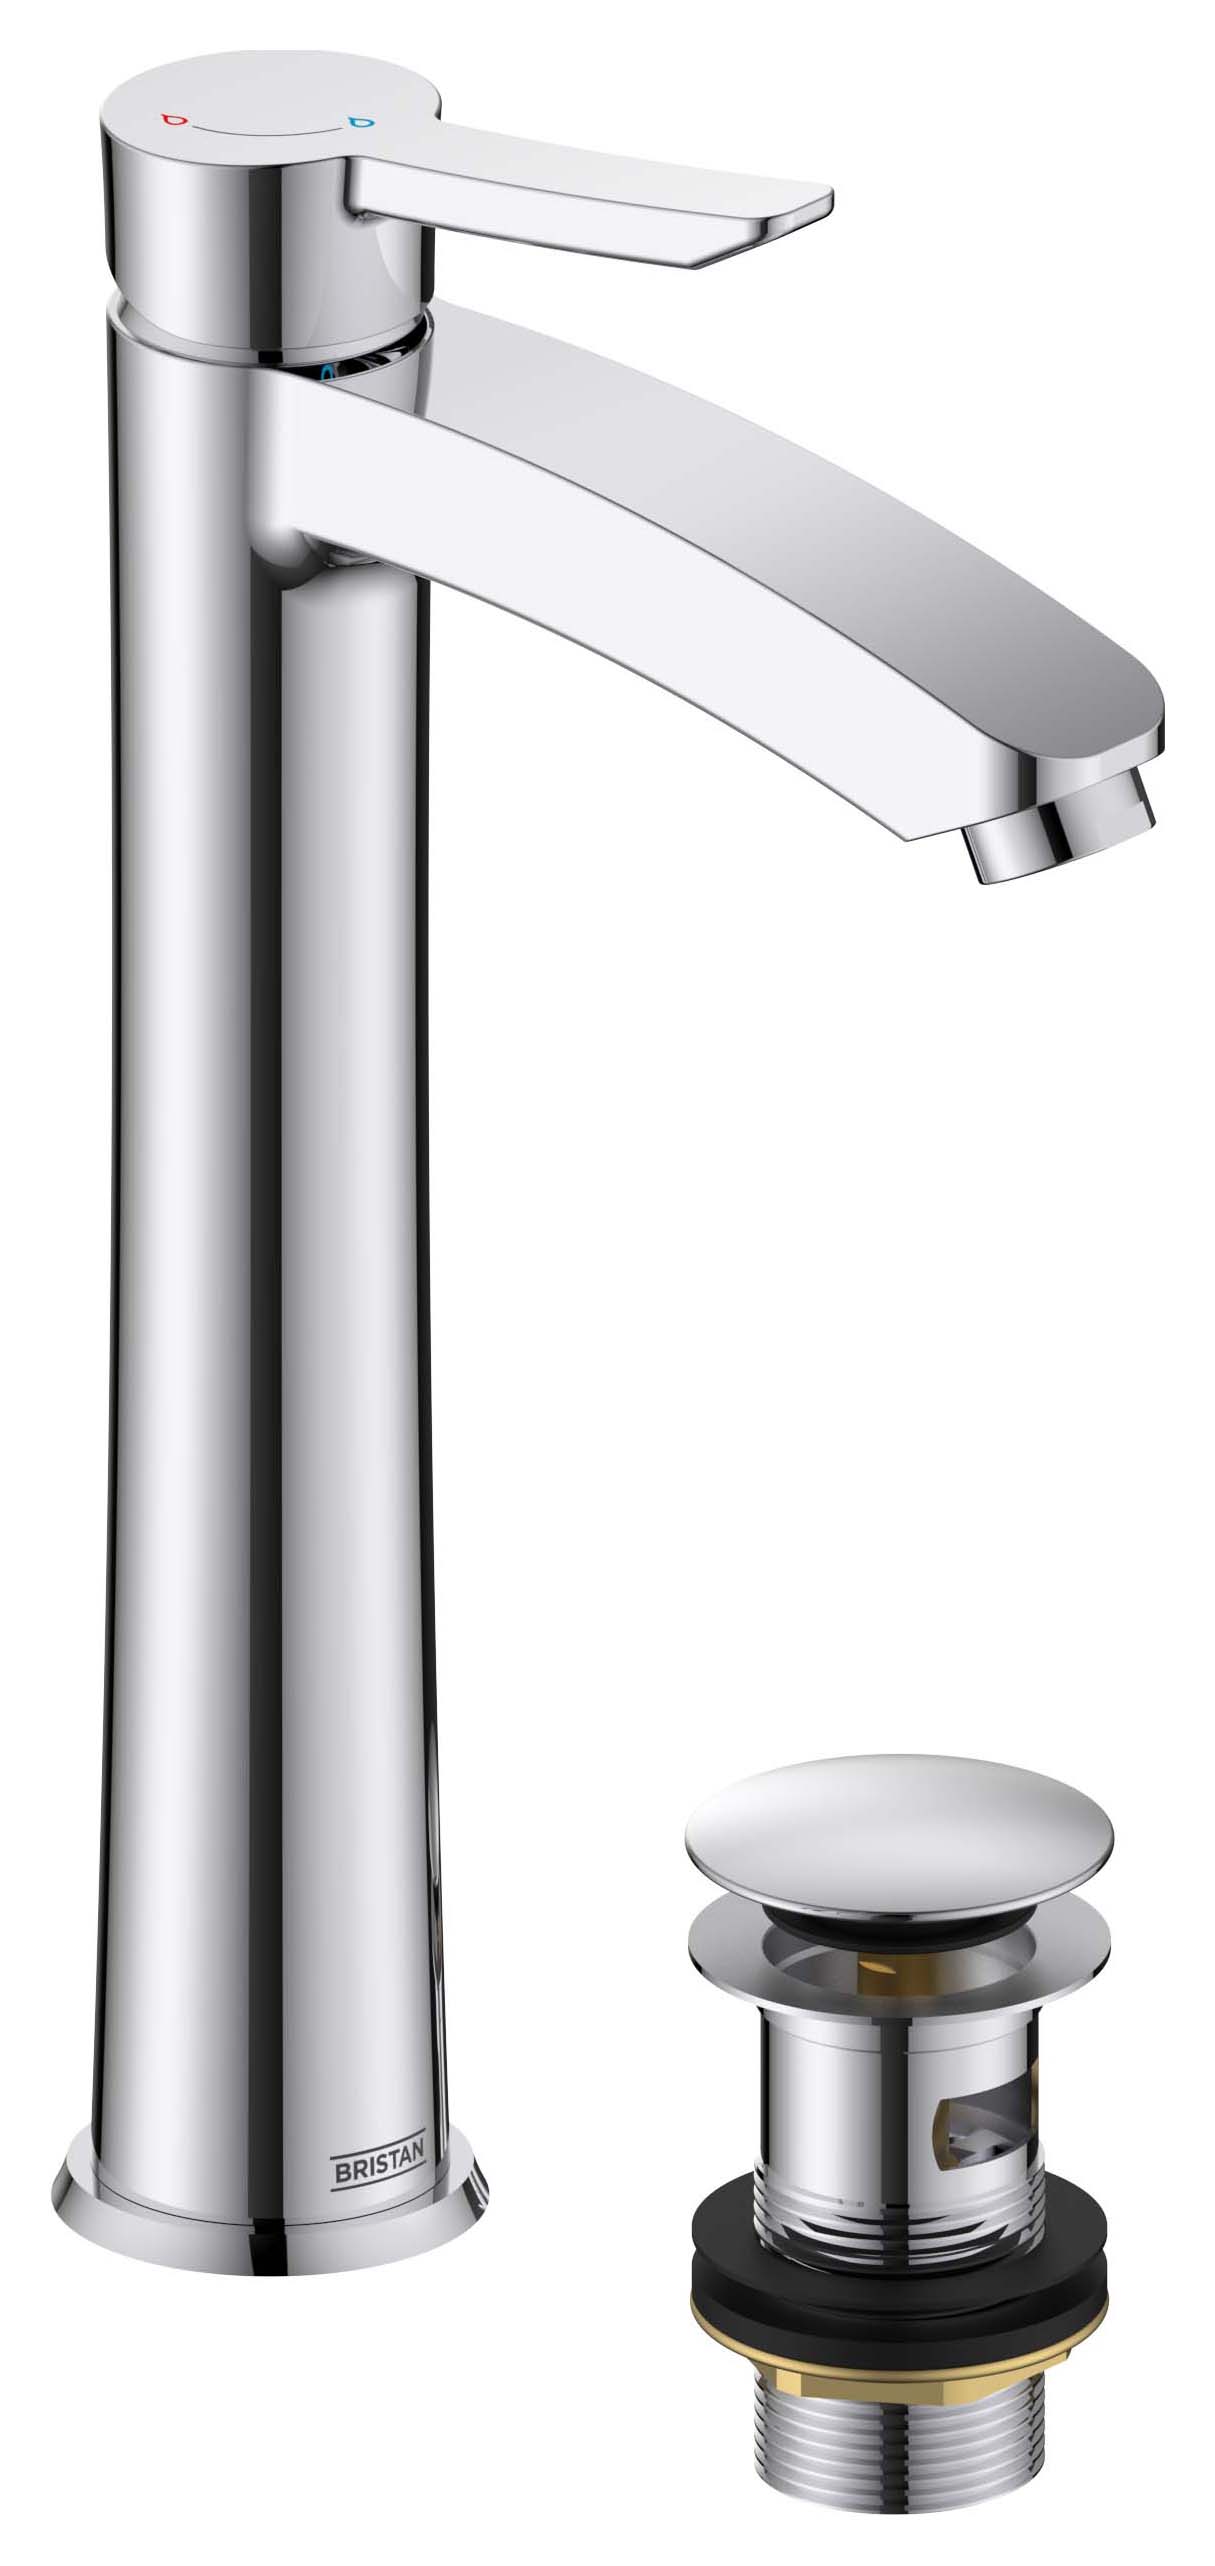 Image of Bristan Apelo Eco Start Tall Basin Mixer with Clicker Waste - Chrome